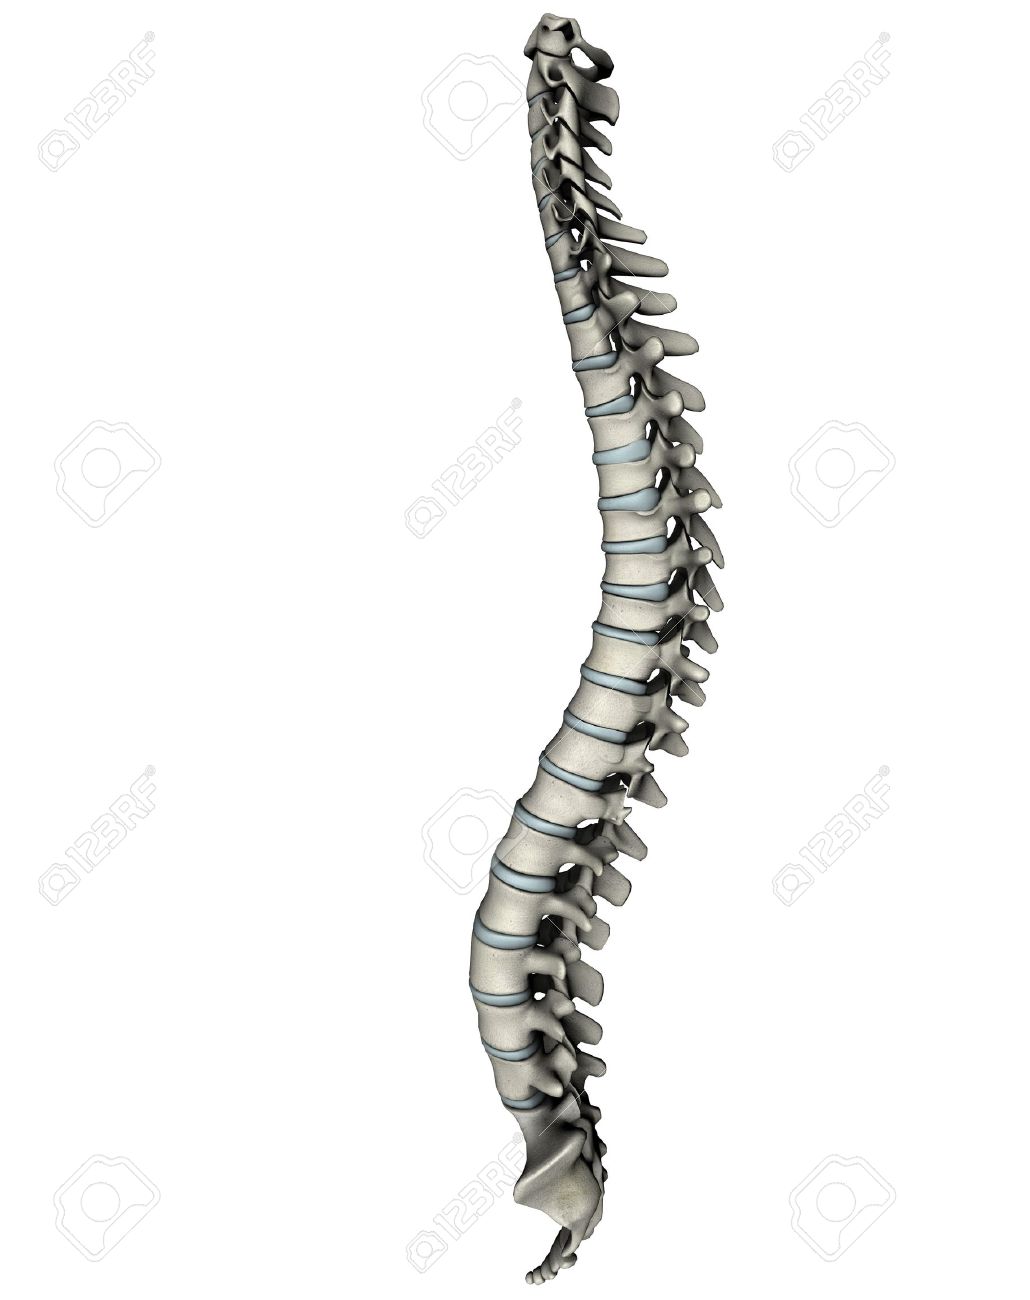 Human Spine Lateral Anatomical 3d Graphic On White Background